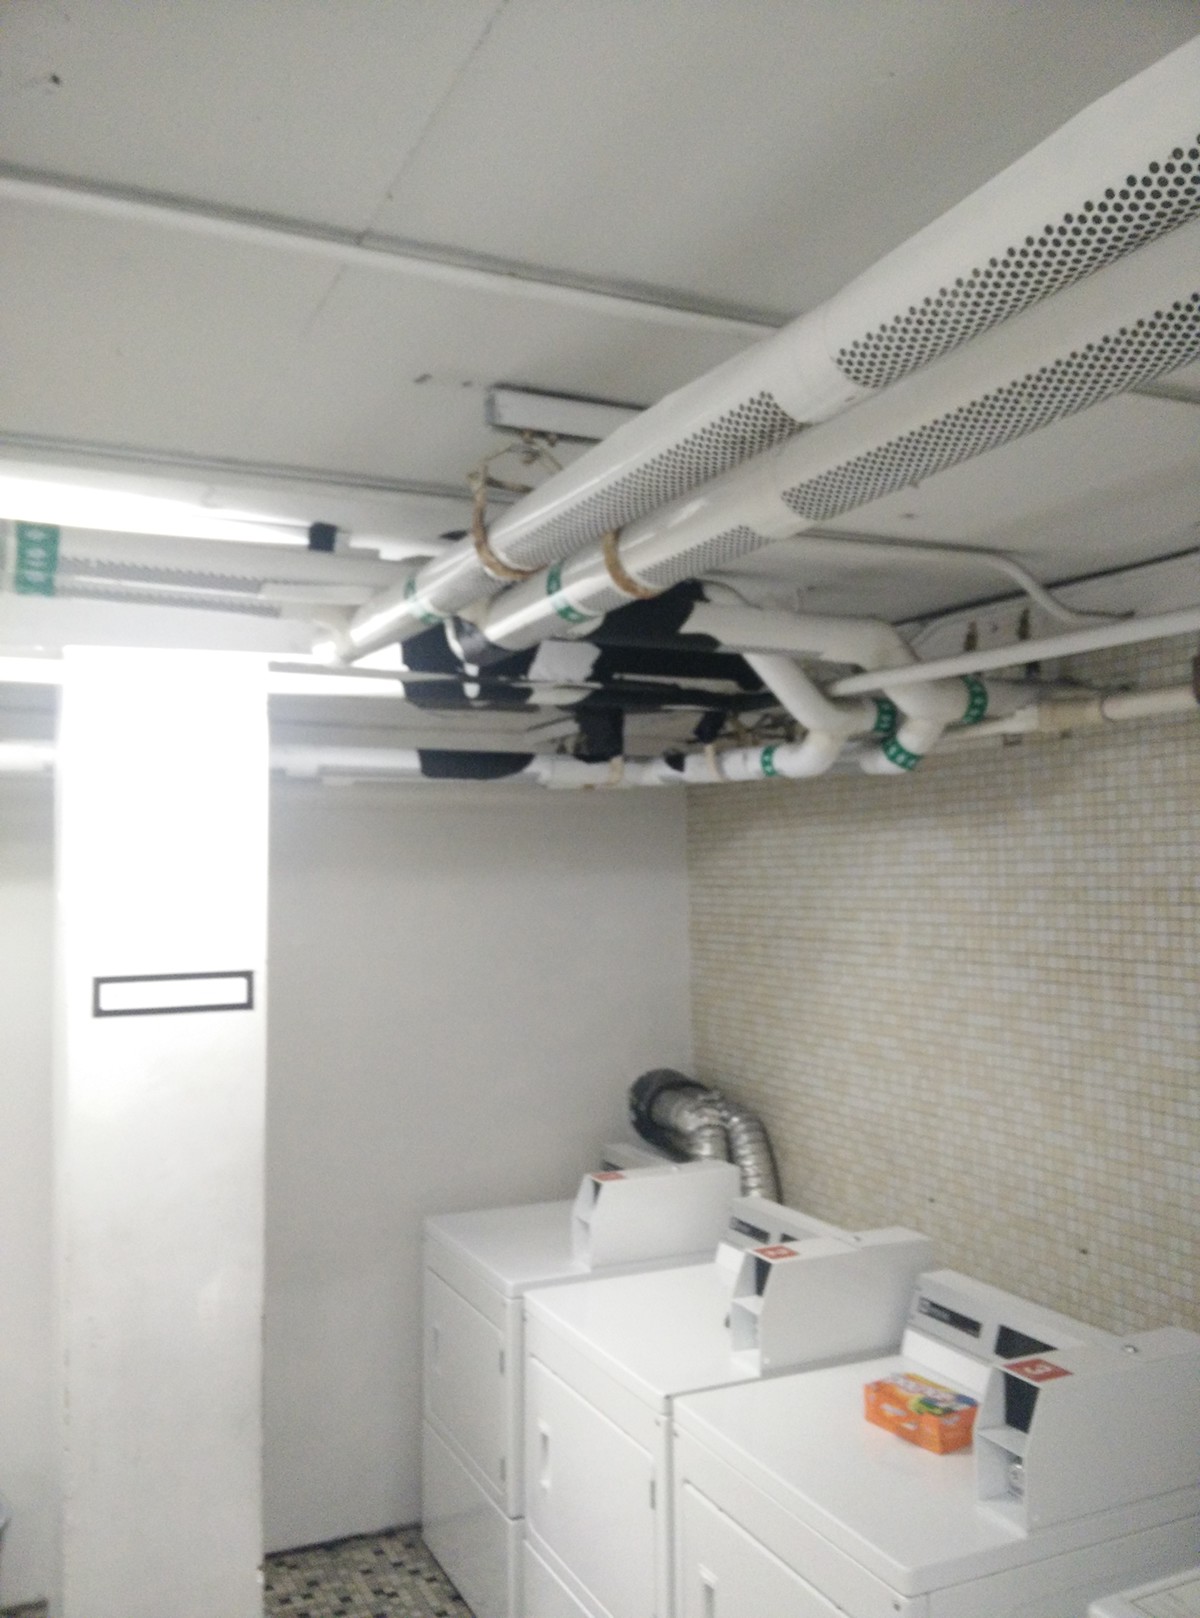 installation chinese happiness double happiness tape art laundry room Perspective anamorphic